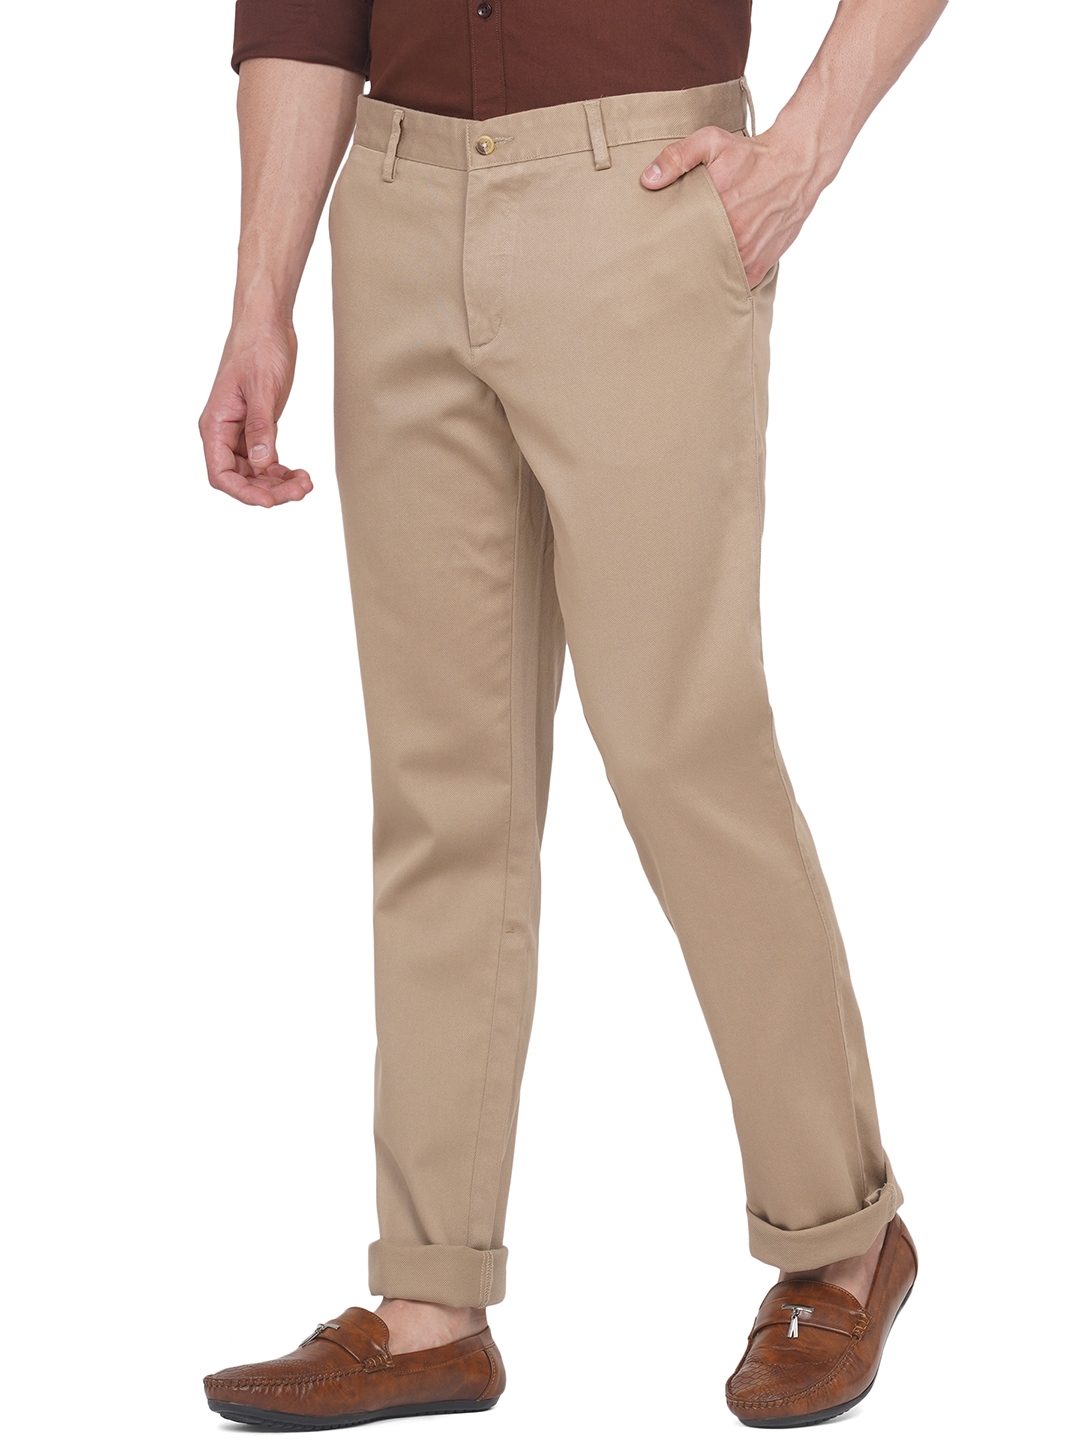 Greenfibre | Light Khaki Solid Slim Fit Casual Trouser | Greenfibre 1